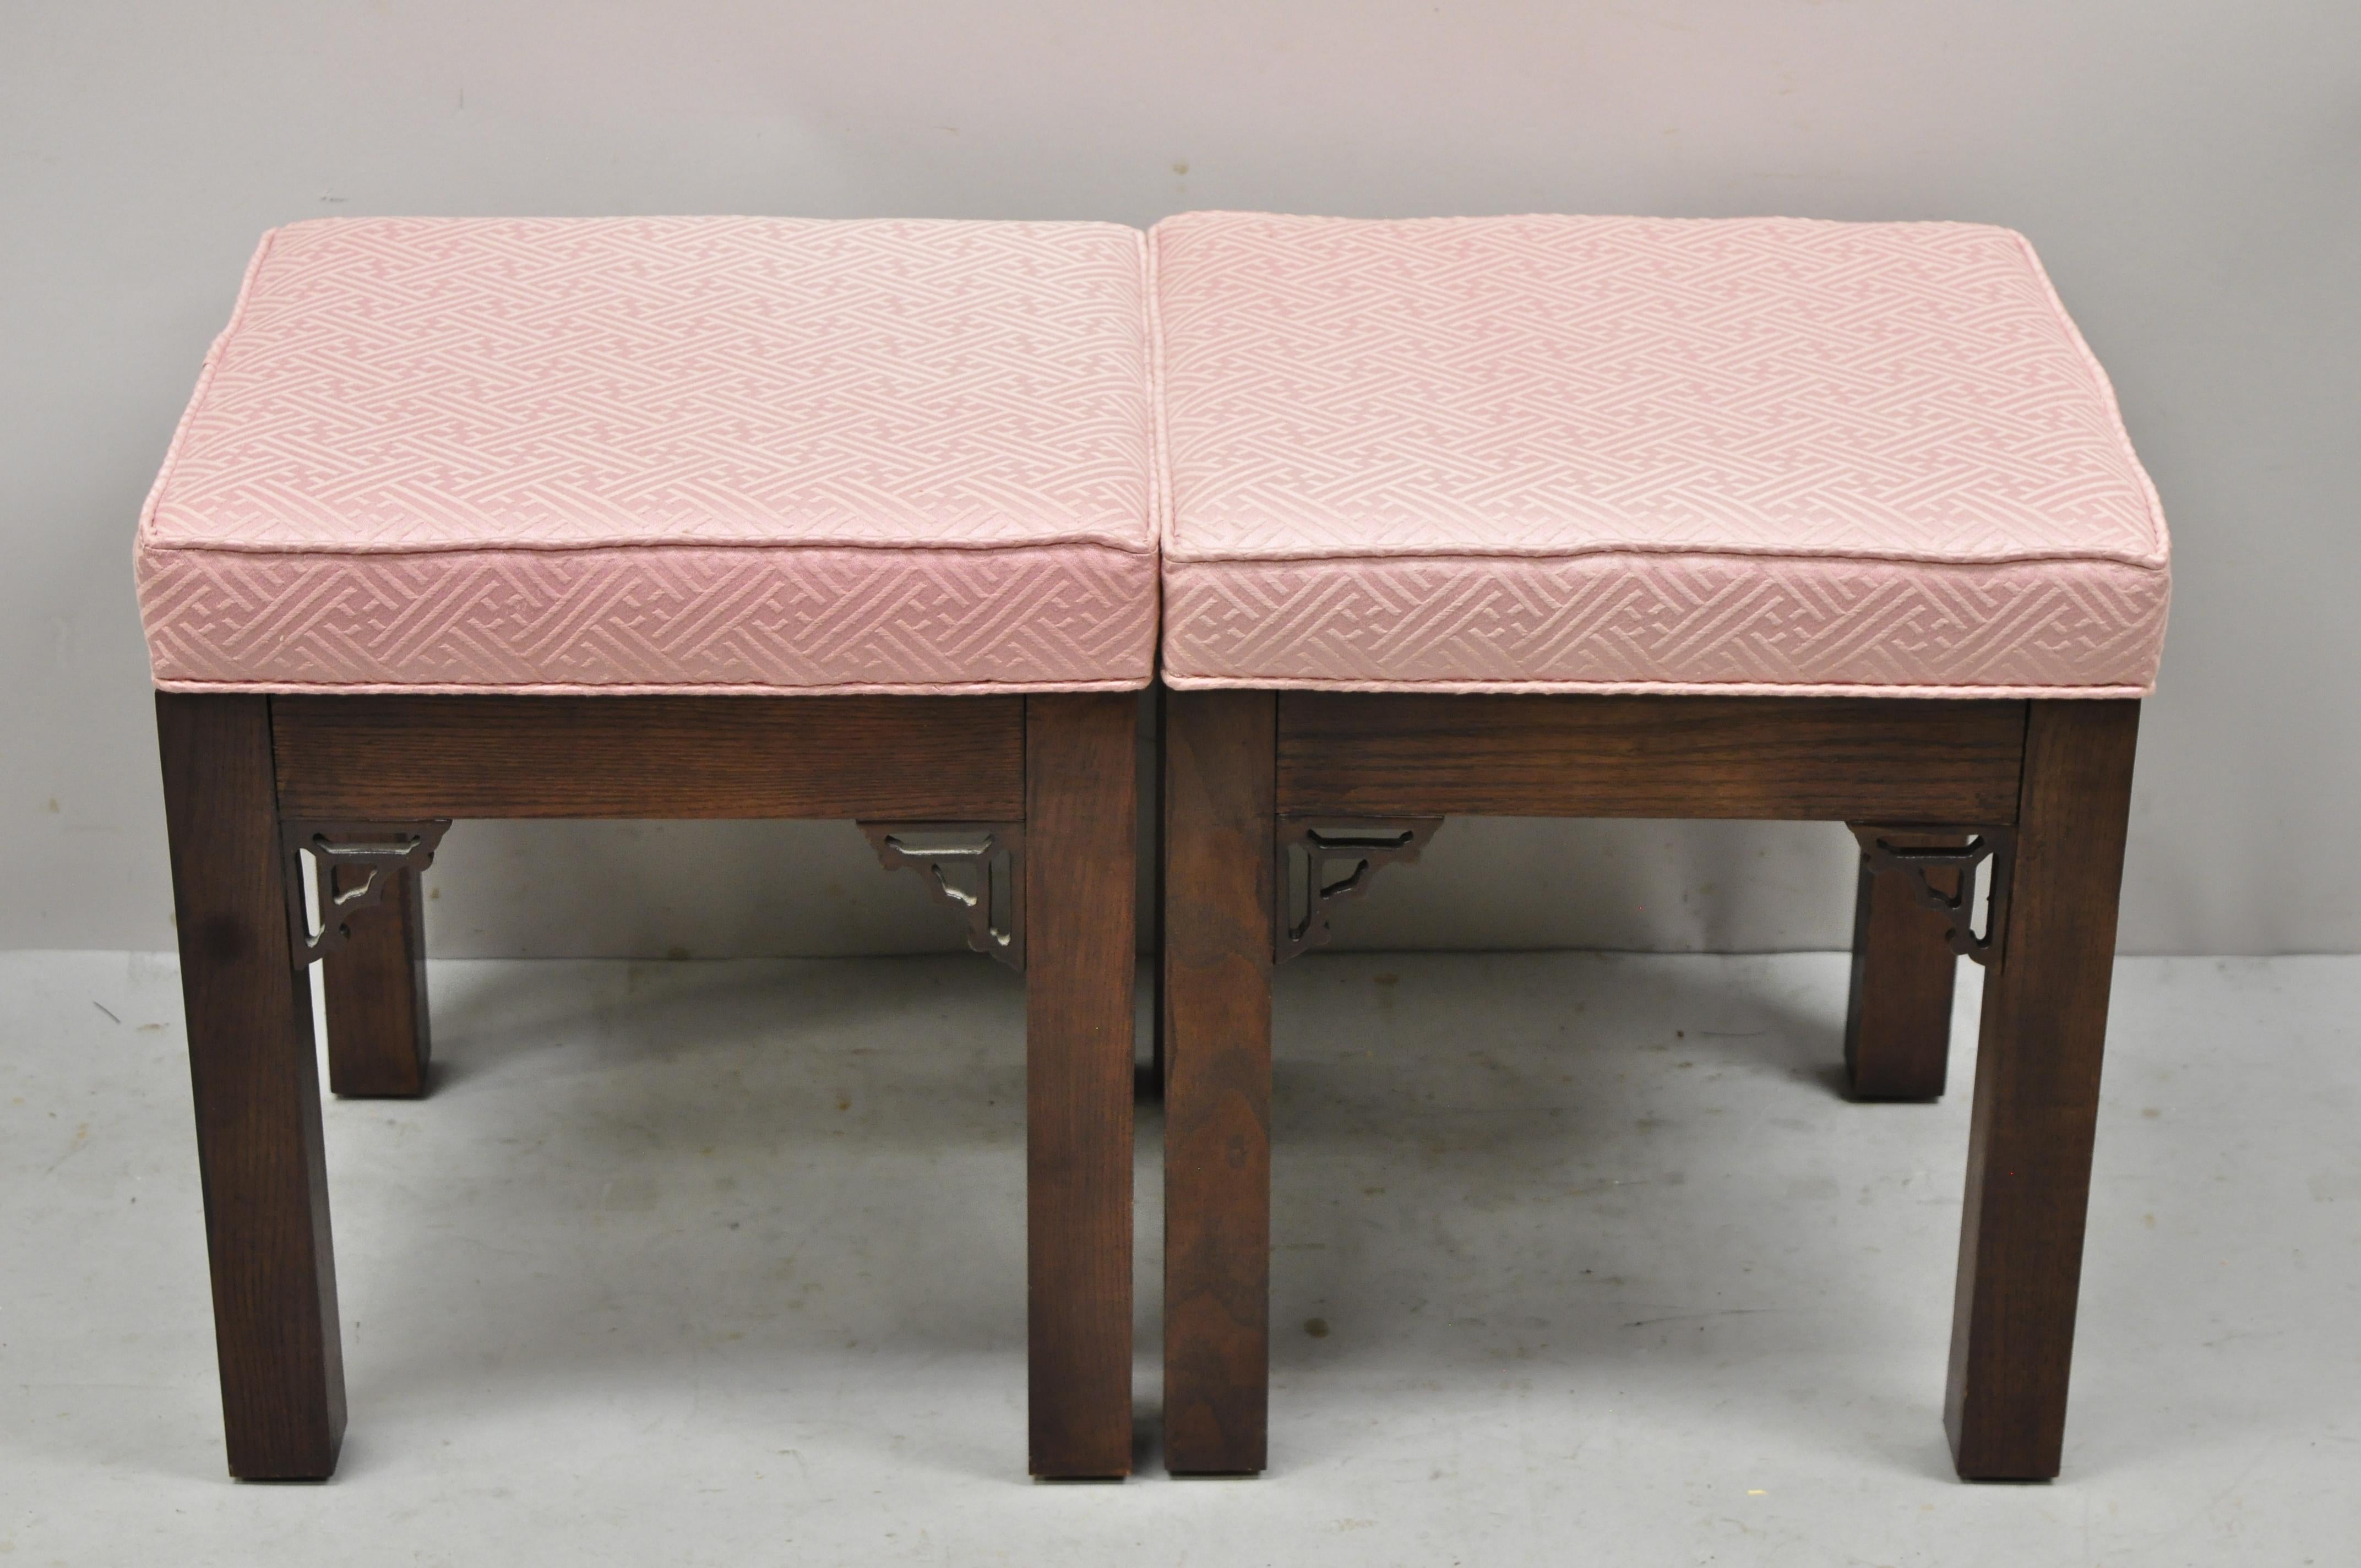 Chinese Chippendale Fretwork Square Pink Upholstered Stools Ottoman, a Pair 2